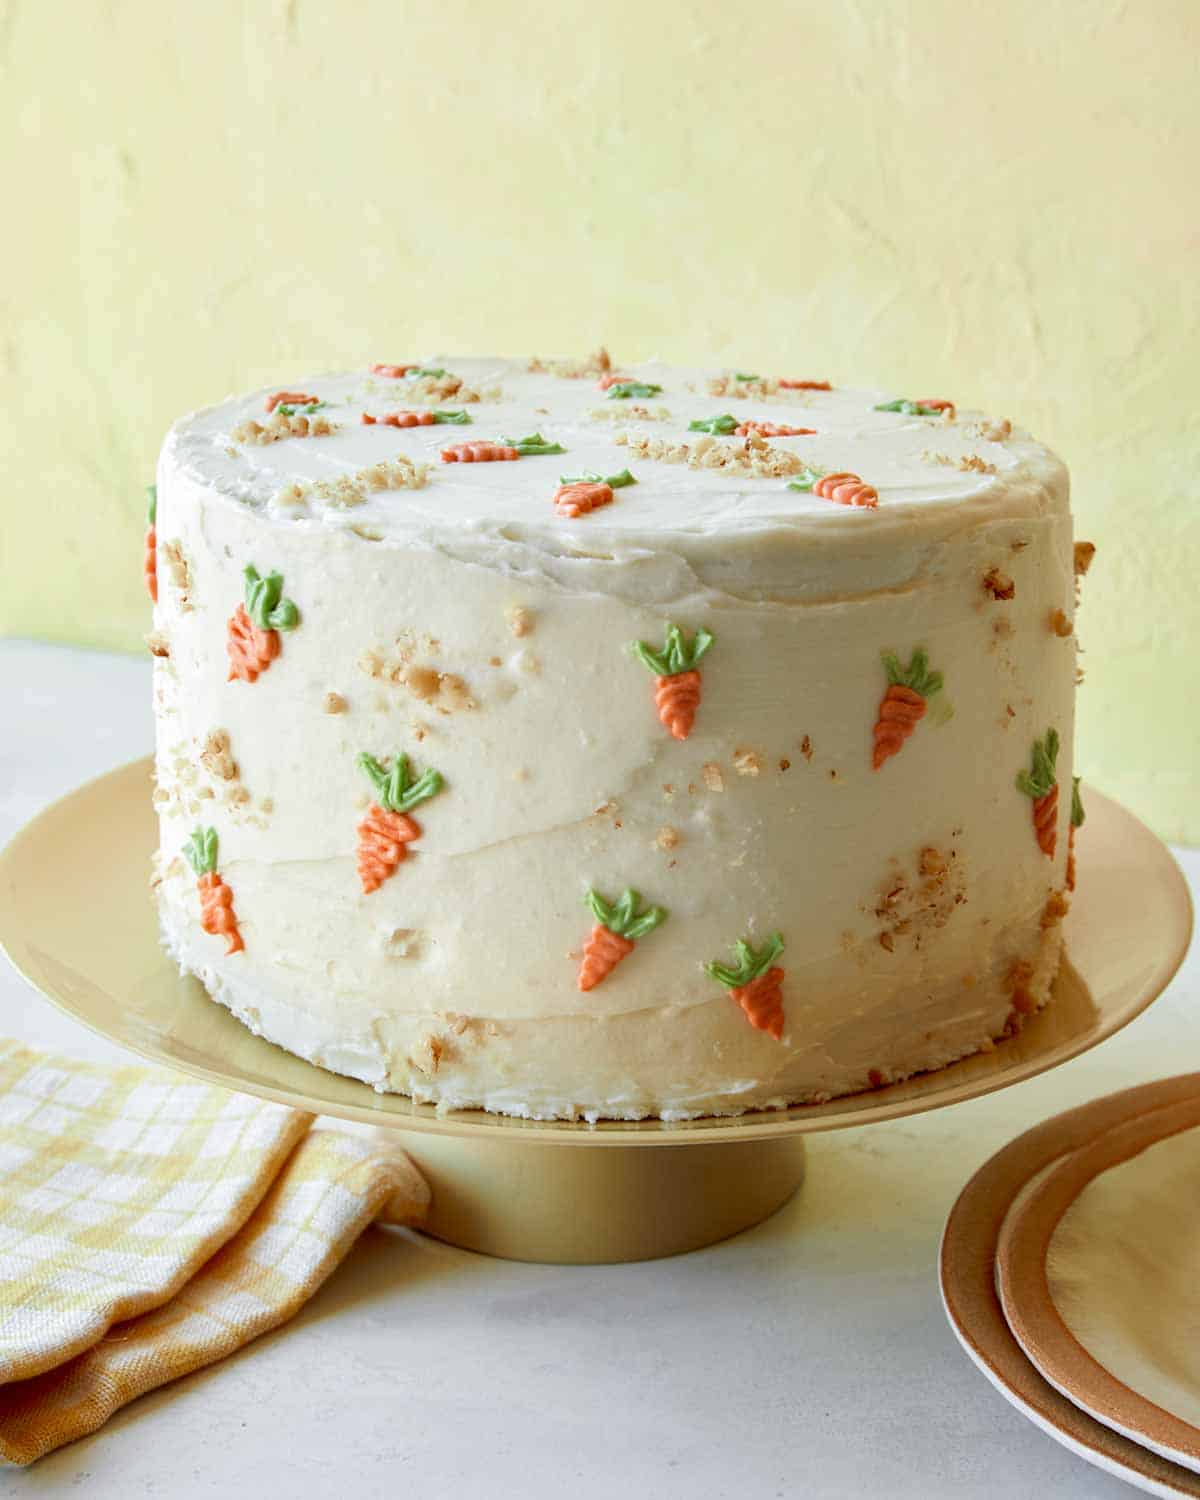 A carrot cake with cream cheese frosting on a plate.